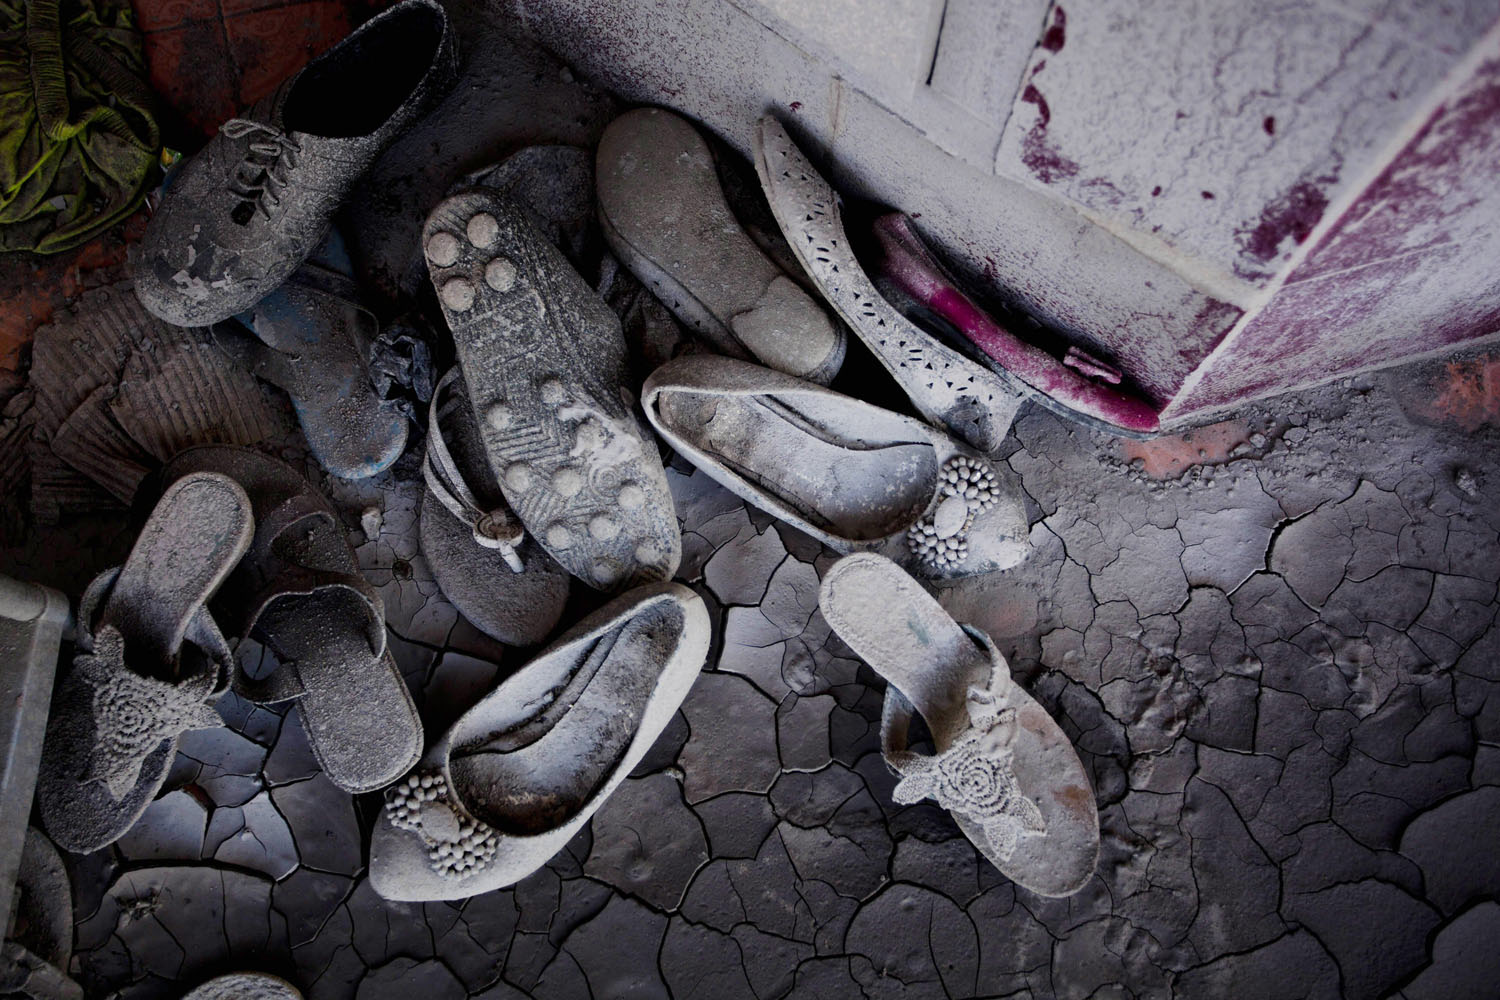 Feb. 5, 2014. Shoes sits covered in ash in front of abandoned house from the erupting Mount Sinabung February 05, 2014 in Sigarang Garang village, Karo District, North Sumatra, Indonesia.